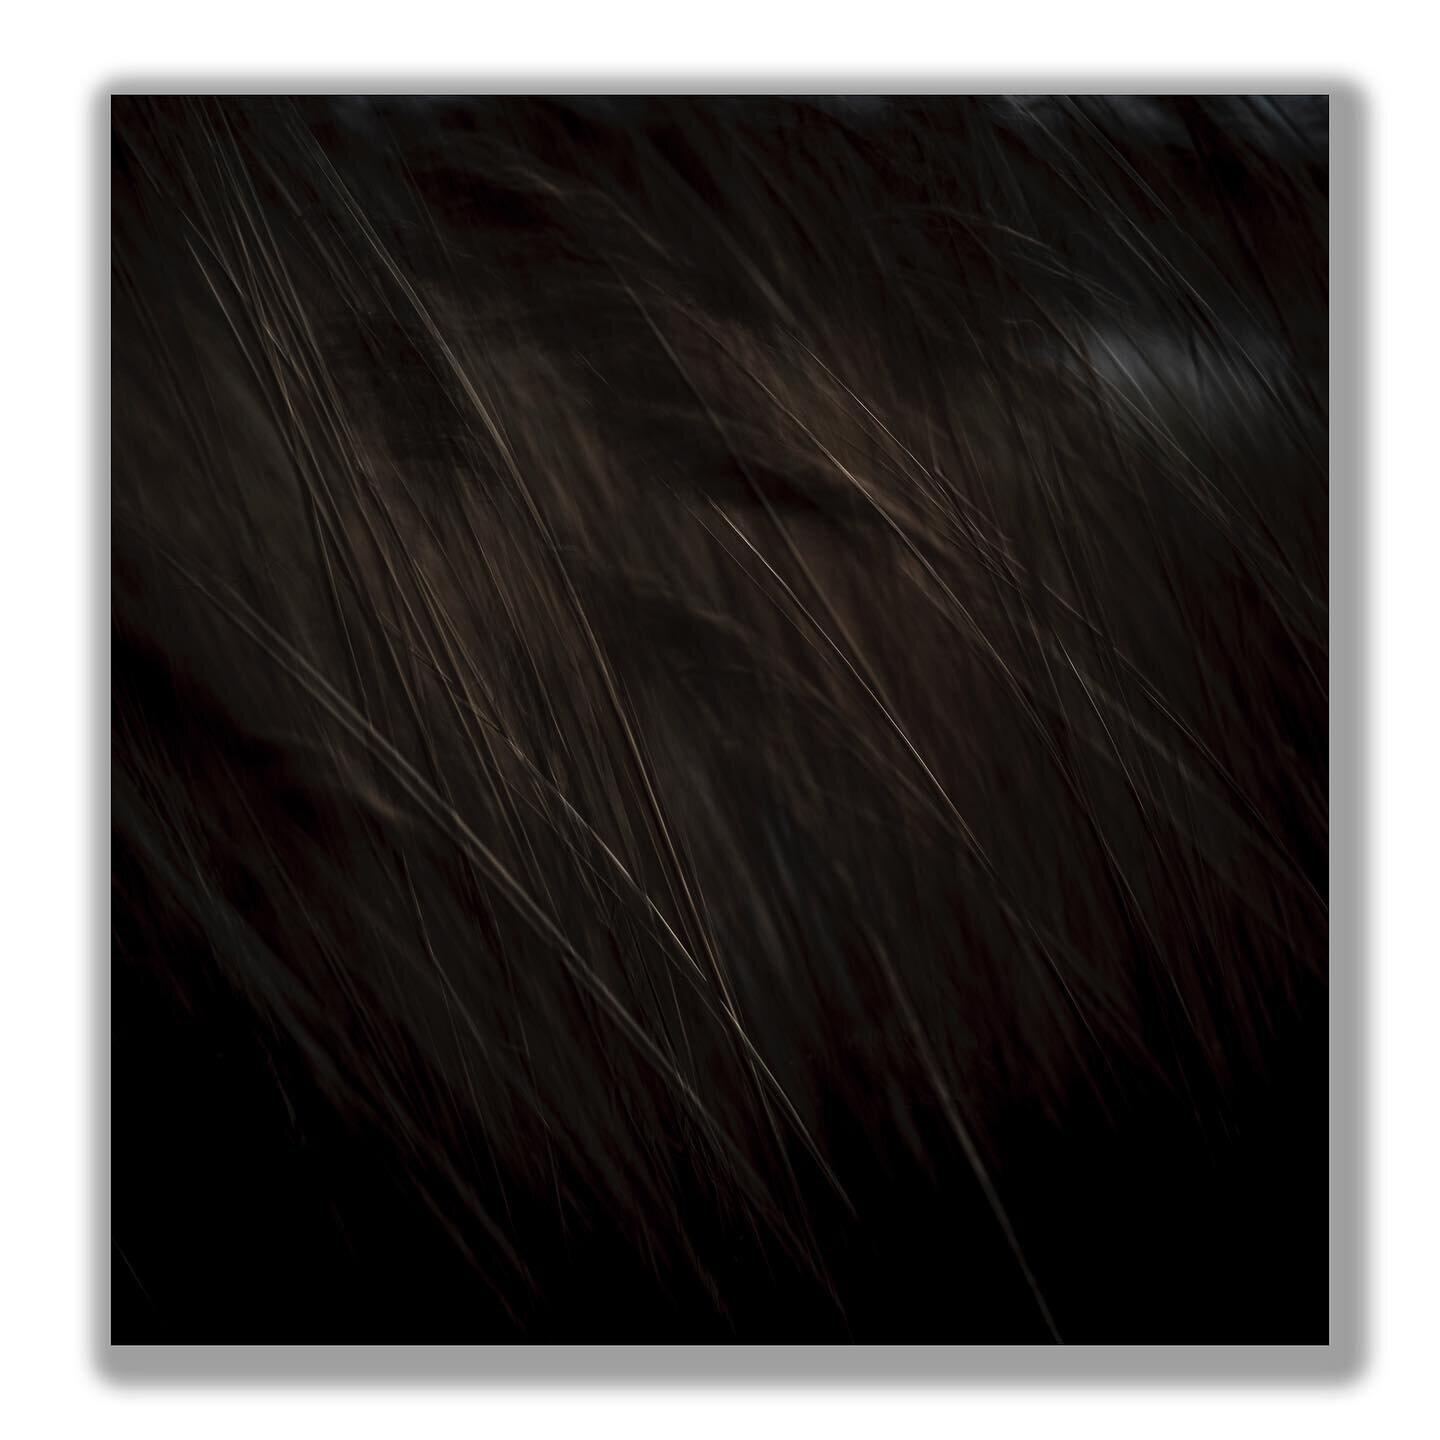 Latest image from my &lsquo;Grow Dark&rsquo; series &hellip;
.
.
.
.
#fineartphotography #growdark #artphoto #marshland #reeds #darkaesthetic #sussexcountryside #fineartphoto #landscapephotography #fineartprint #movement #icm